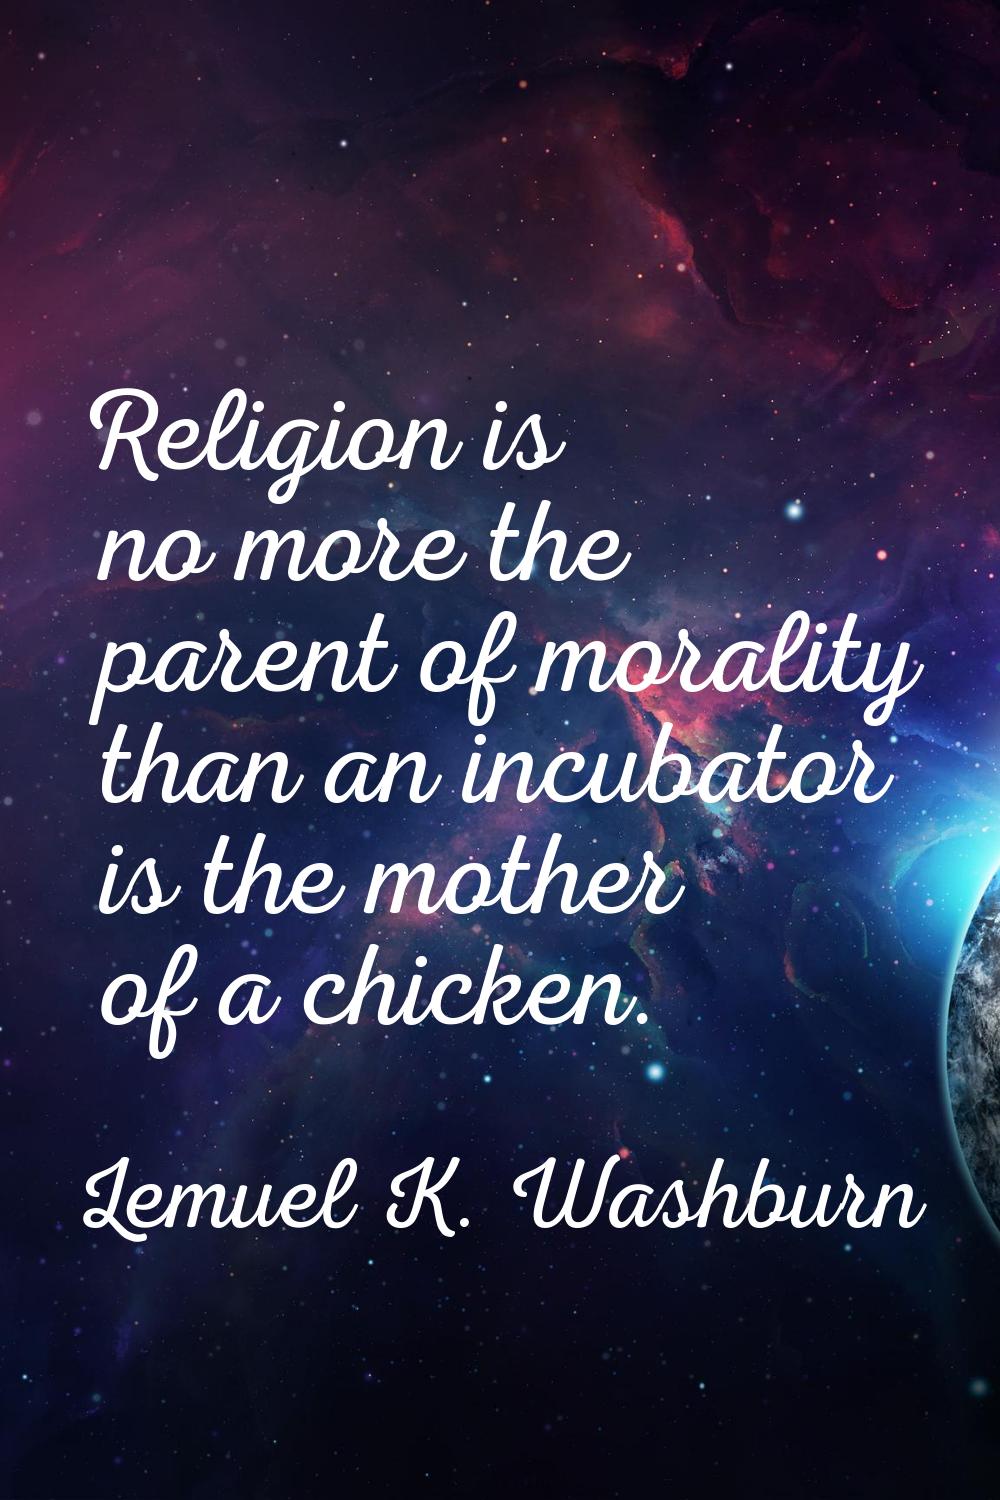 Religion is no more the parent of morality than an incubator is the mother of a chicken.